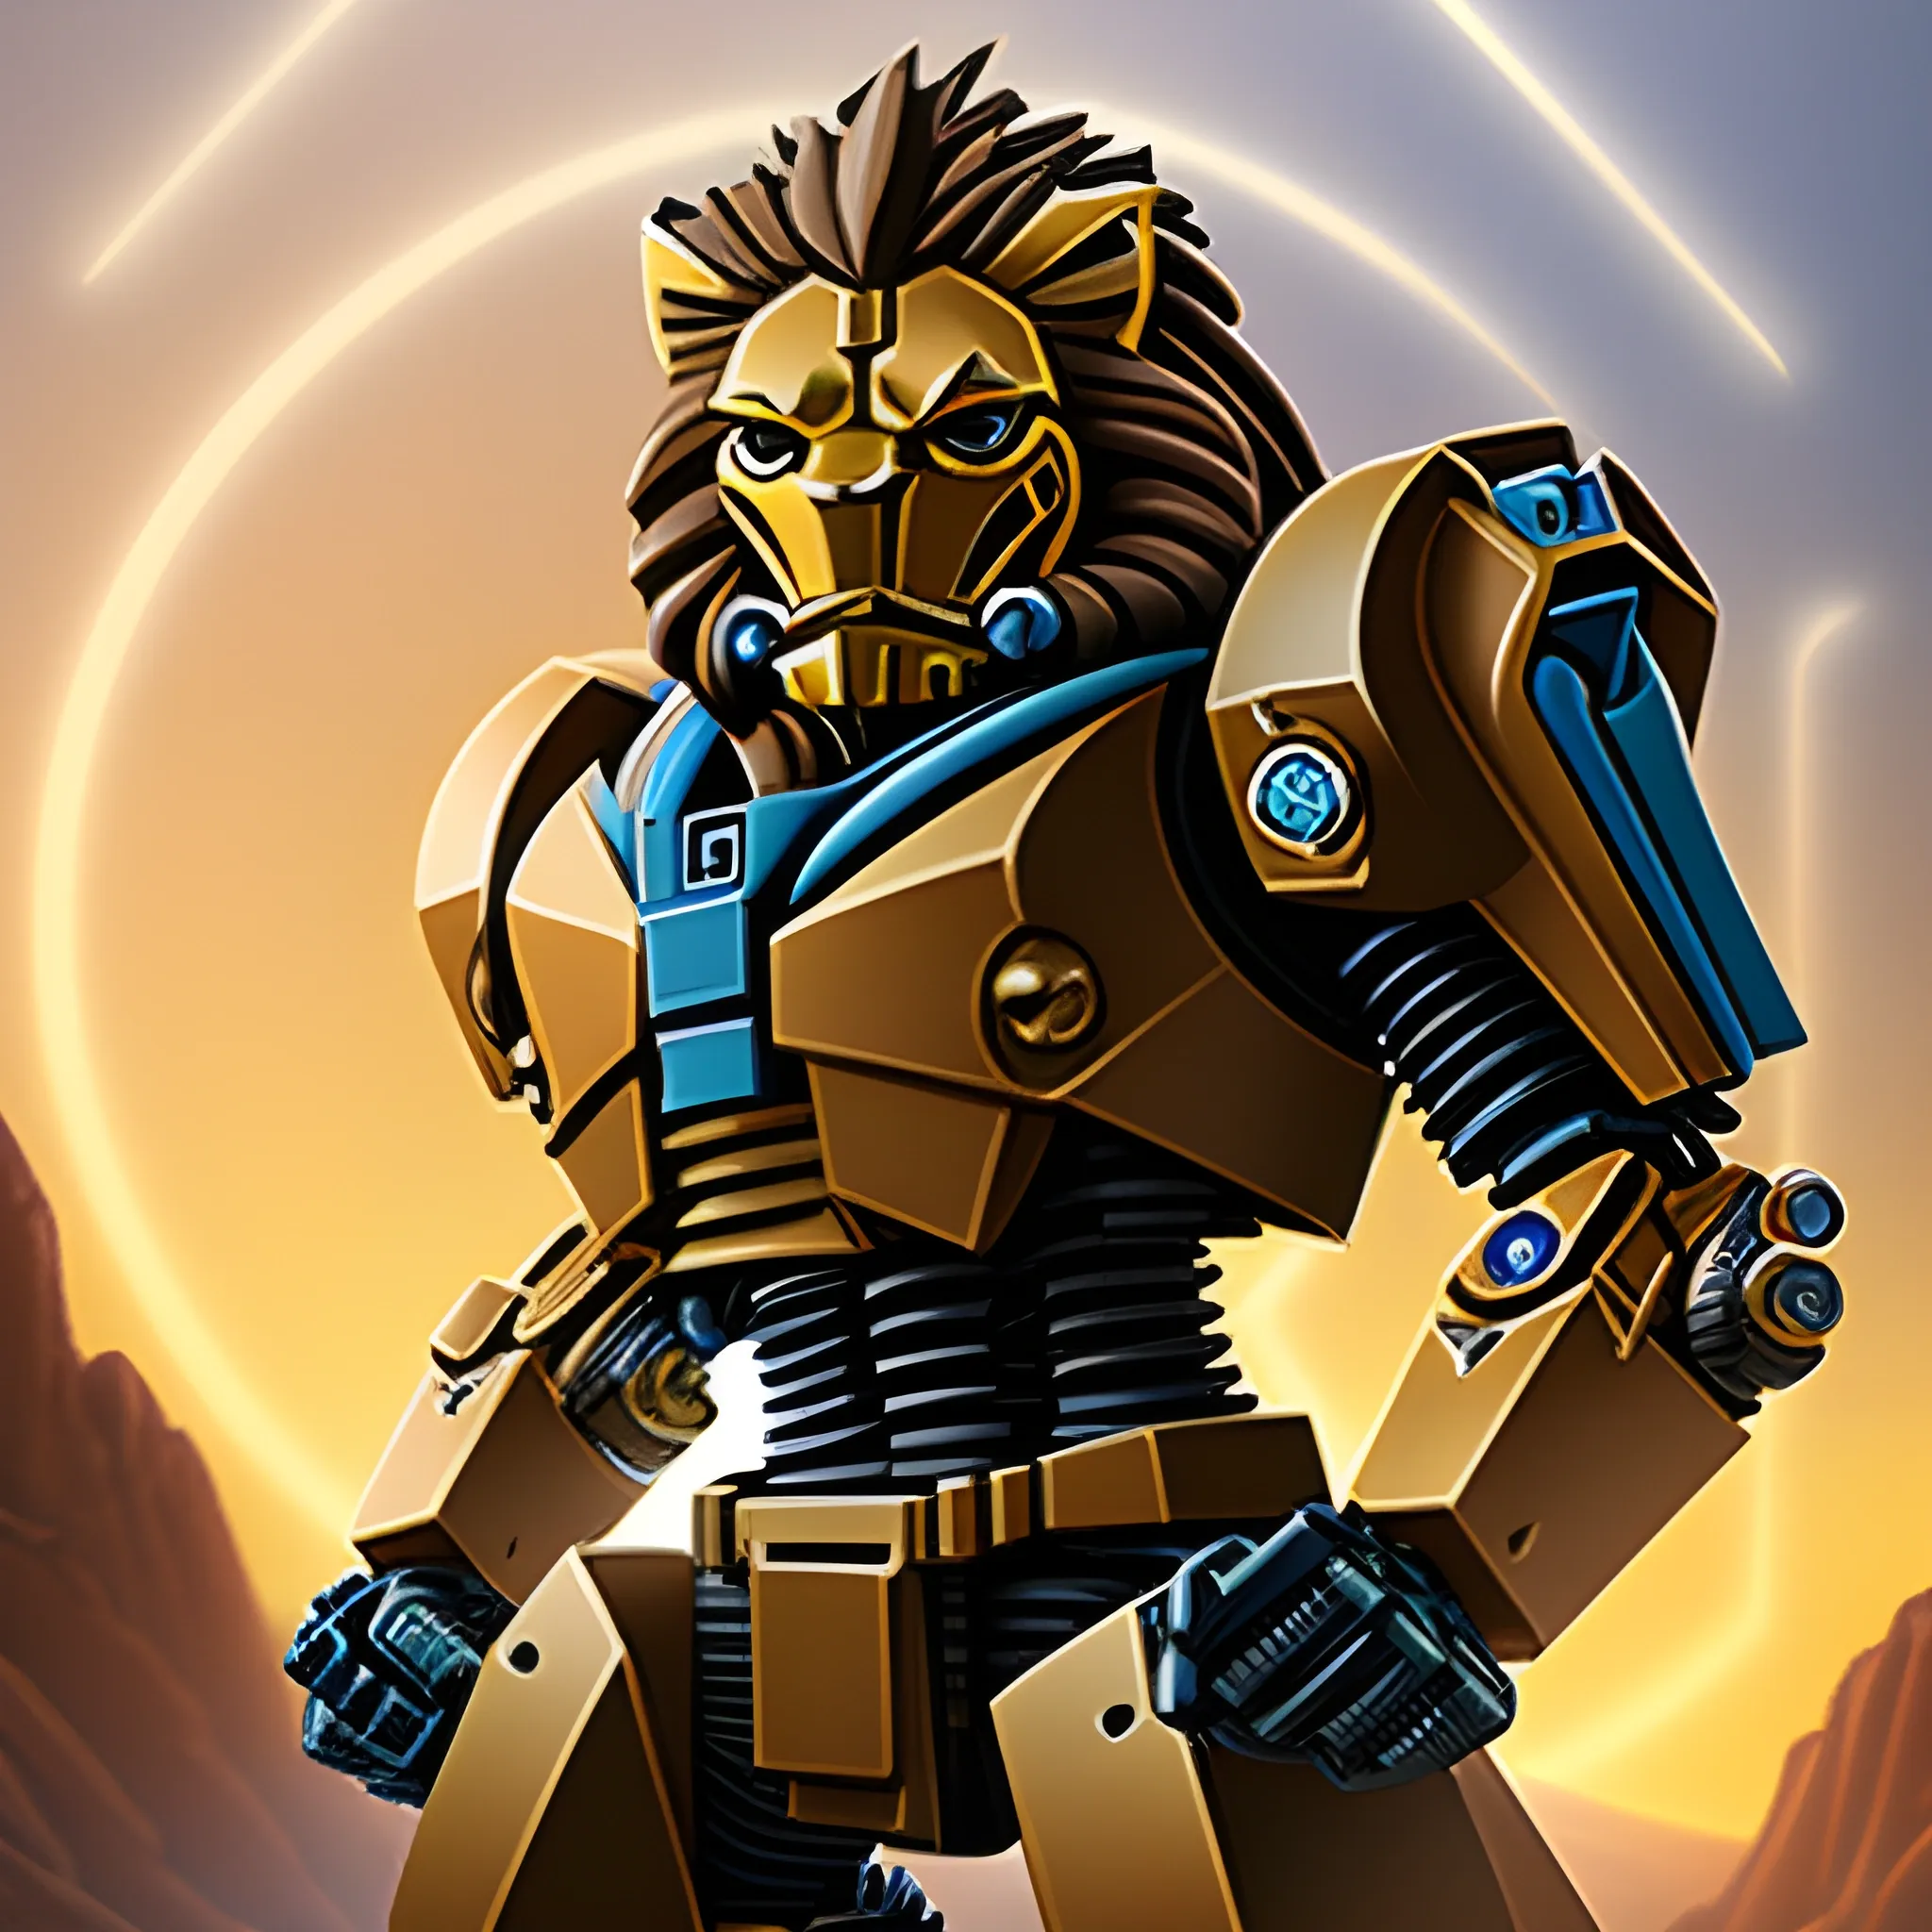 bionicle knight with a lion shaped mask
